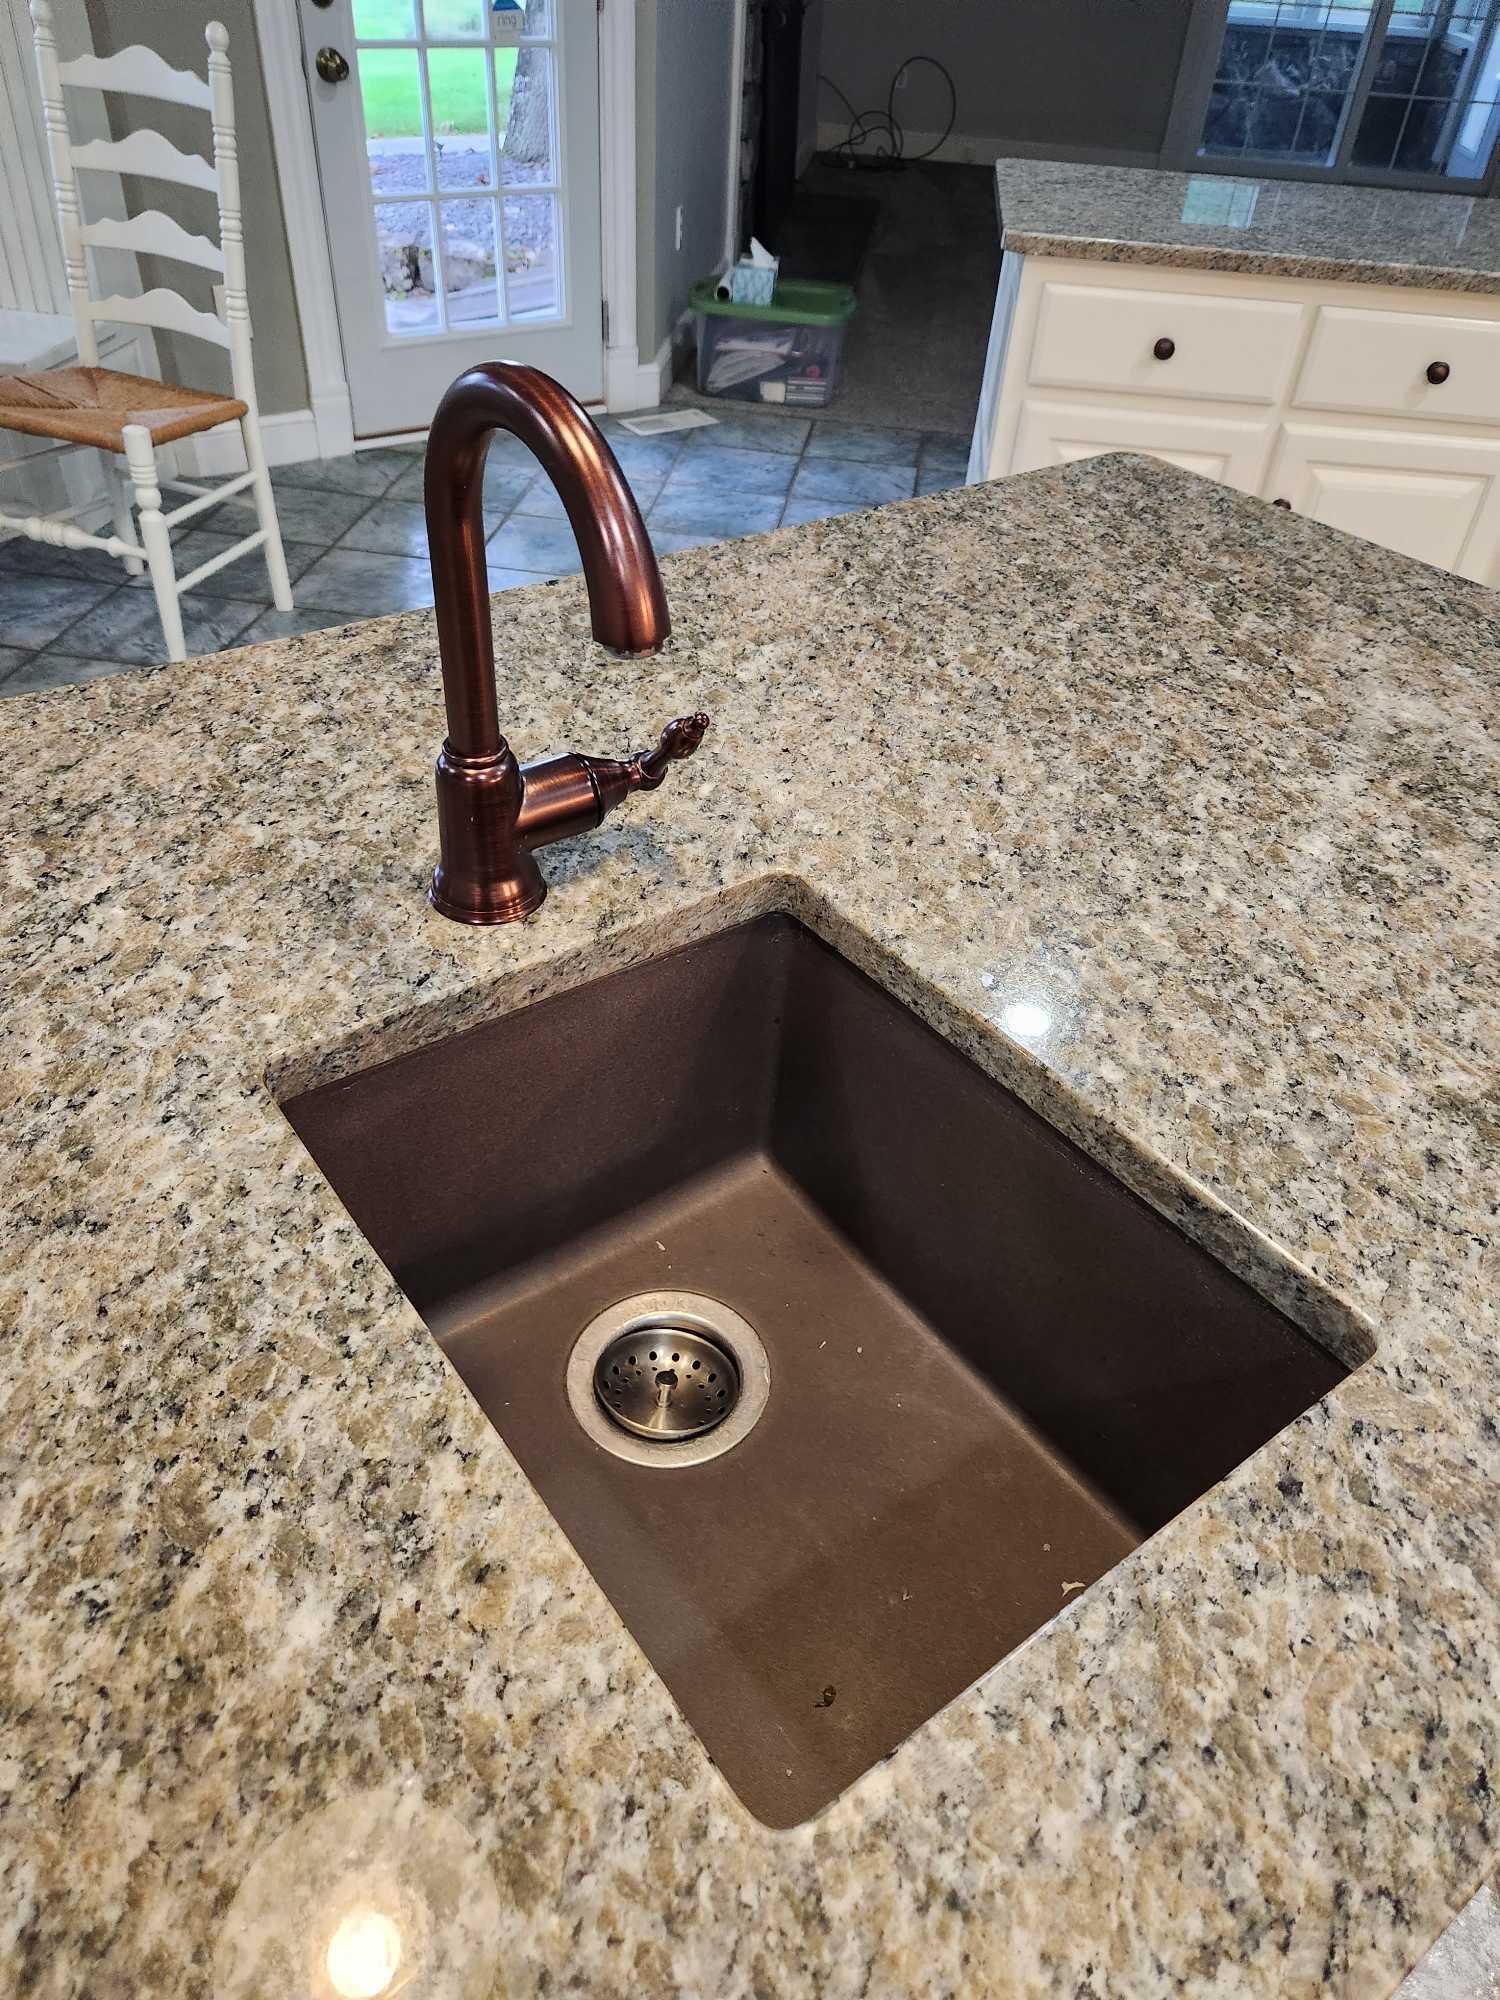 granite top island with sink and garbage disposal. approximately 6 ft by 3 ft....Buyer is responsibl